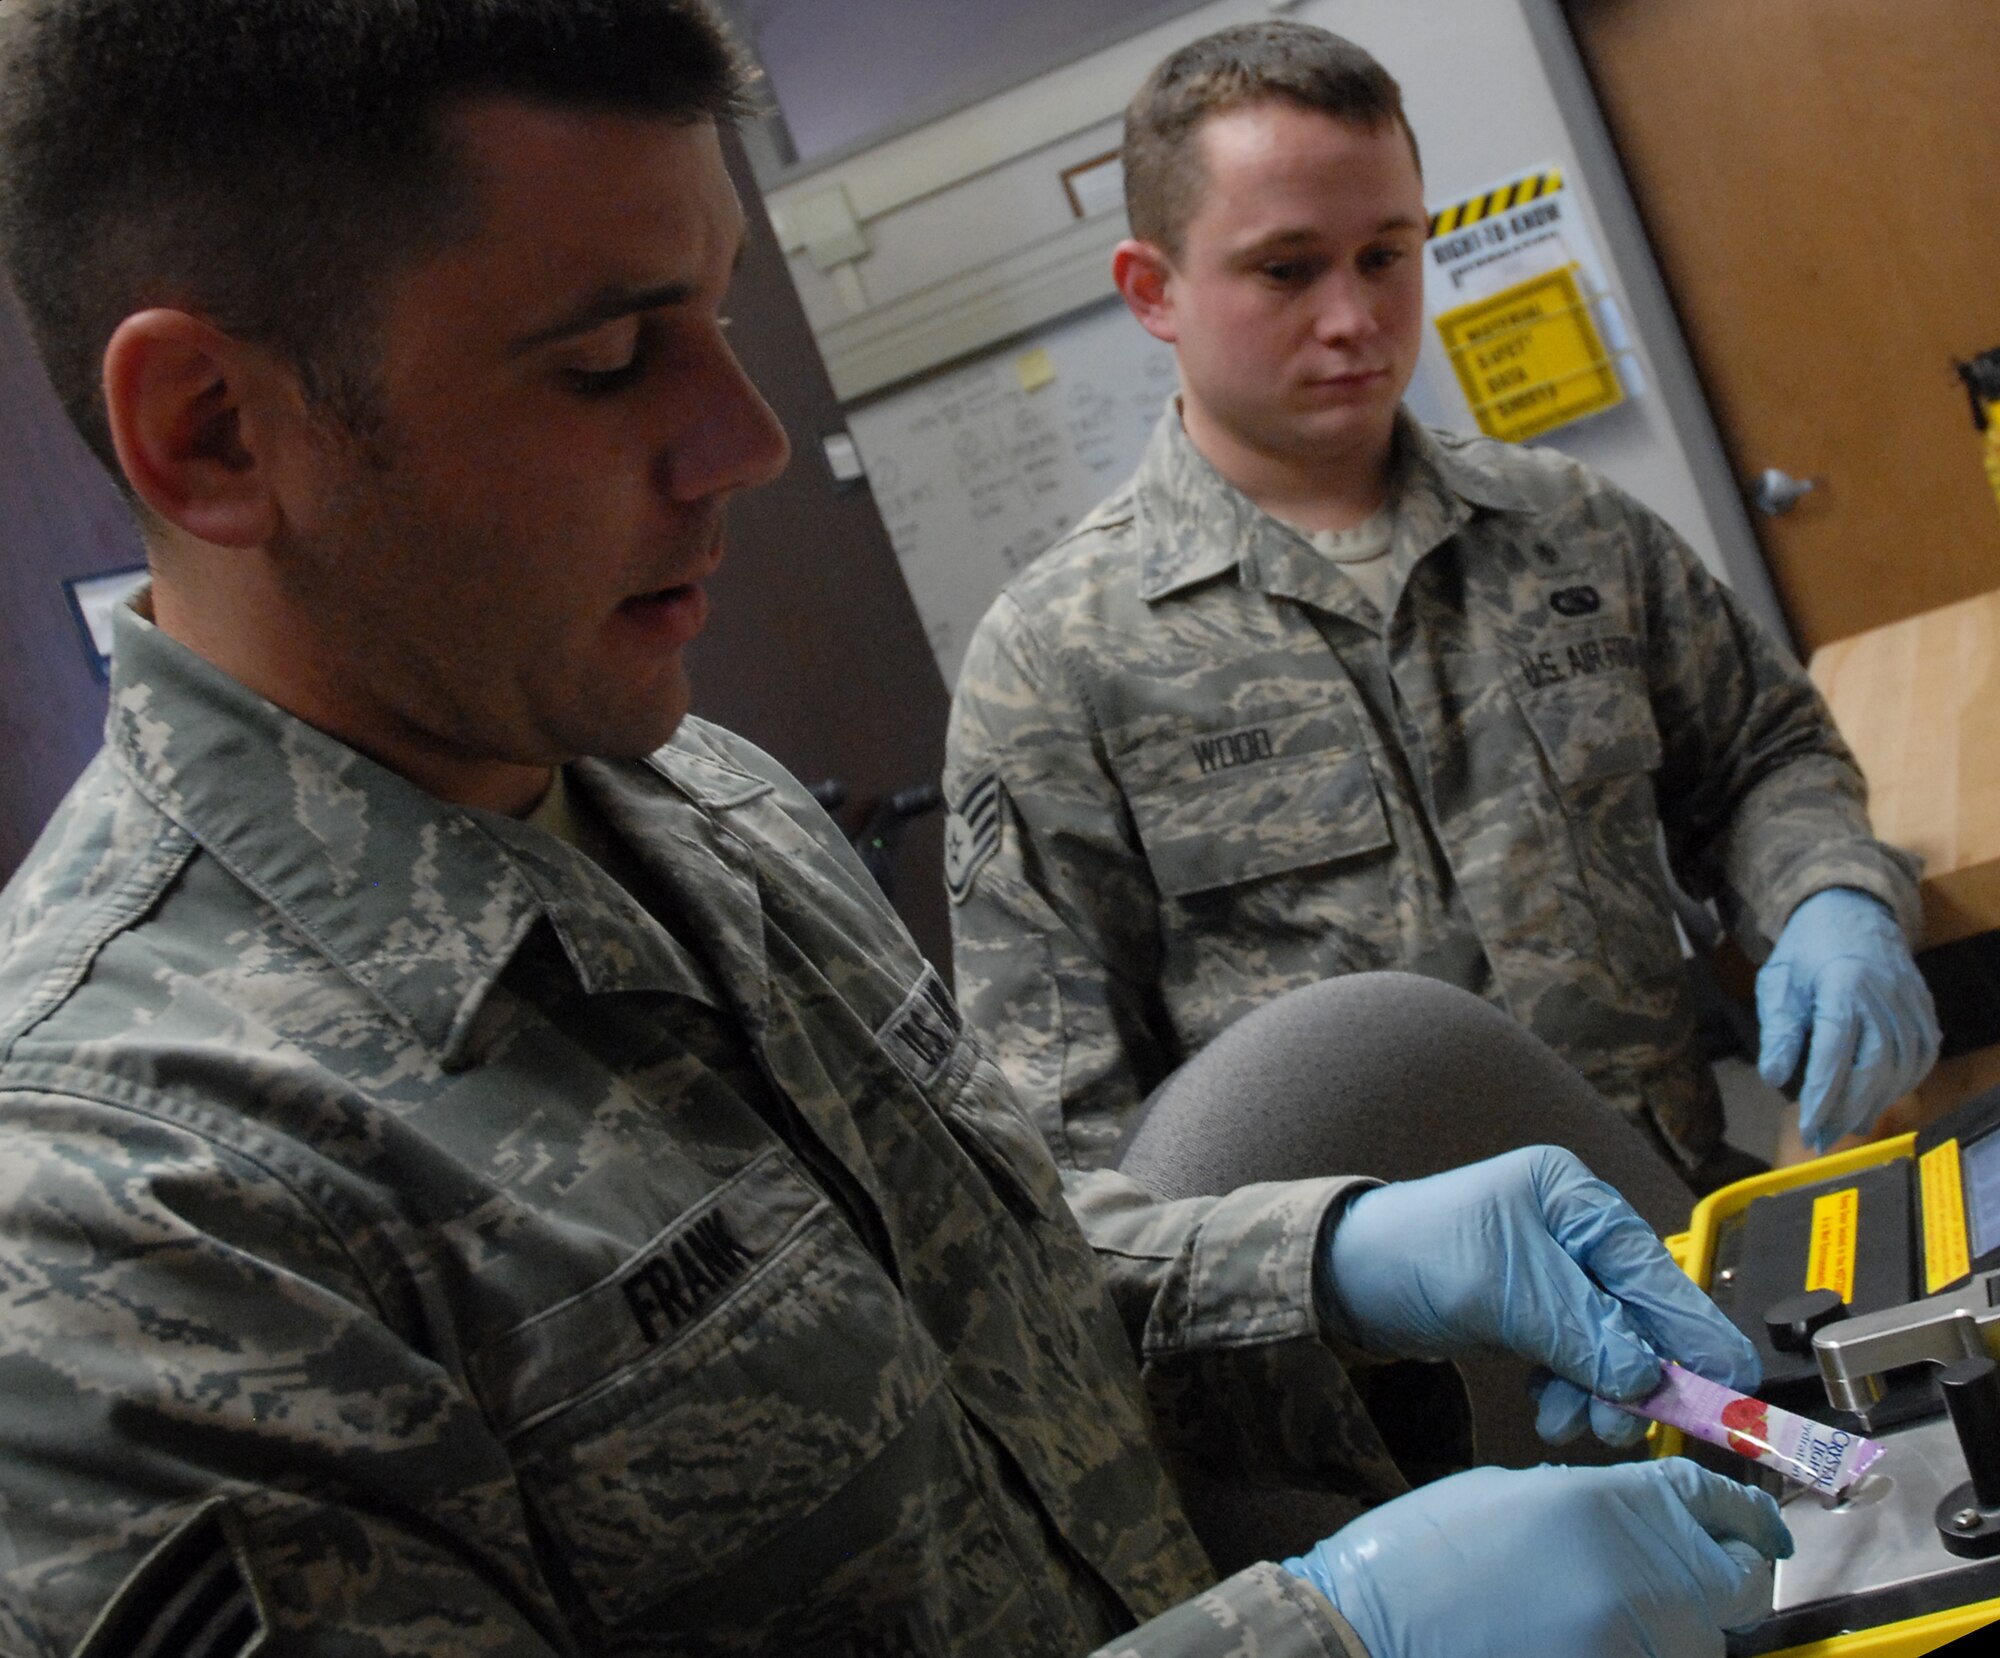 Senior Airman Rich Frank, 341st Medical Operations Squadron bioenvironmental engineer, demonstrates the capabilities of bioenvironmental equipment to identify substances March 4 at the bioenvironmental building. Staff Sgt. James Wood, observing, is also a bioenvironmental engineer with the 341st MDOS and is Airman Frank's supervisor. (U.S. Air Force Photo/Staff Sgt. Dillon White)